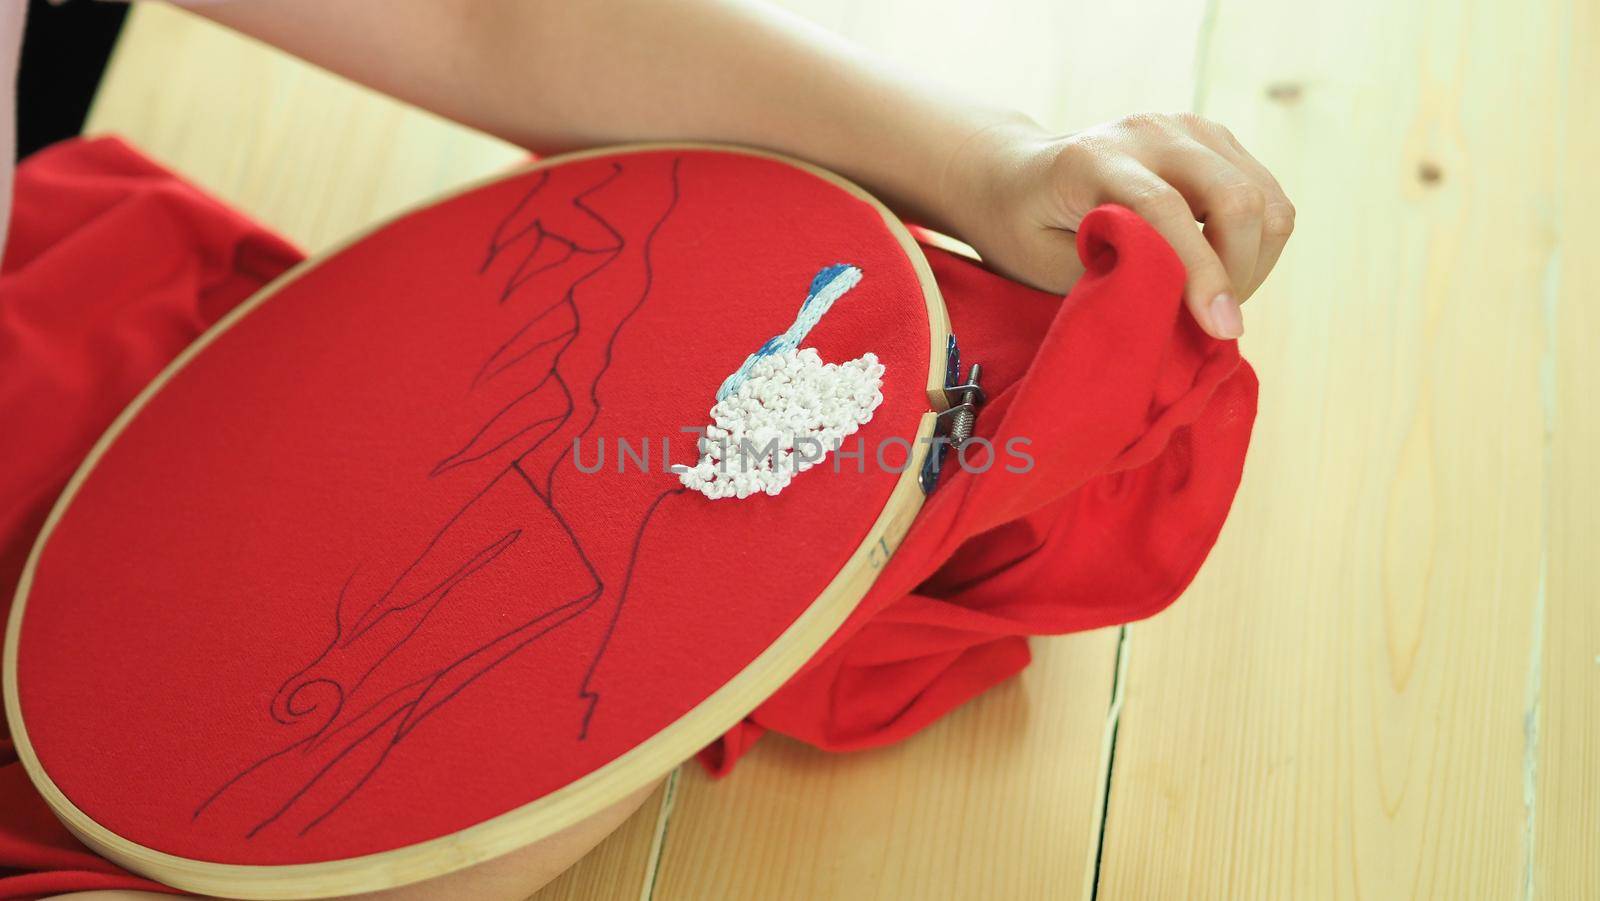 Woman hands and craft work. Embroider sewing by hand. Handicraft work by thread needle sew knit. Wood frame embroidery hoop. Needlework handicraft crafting quarantine leisure concept. 